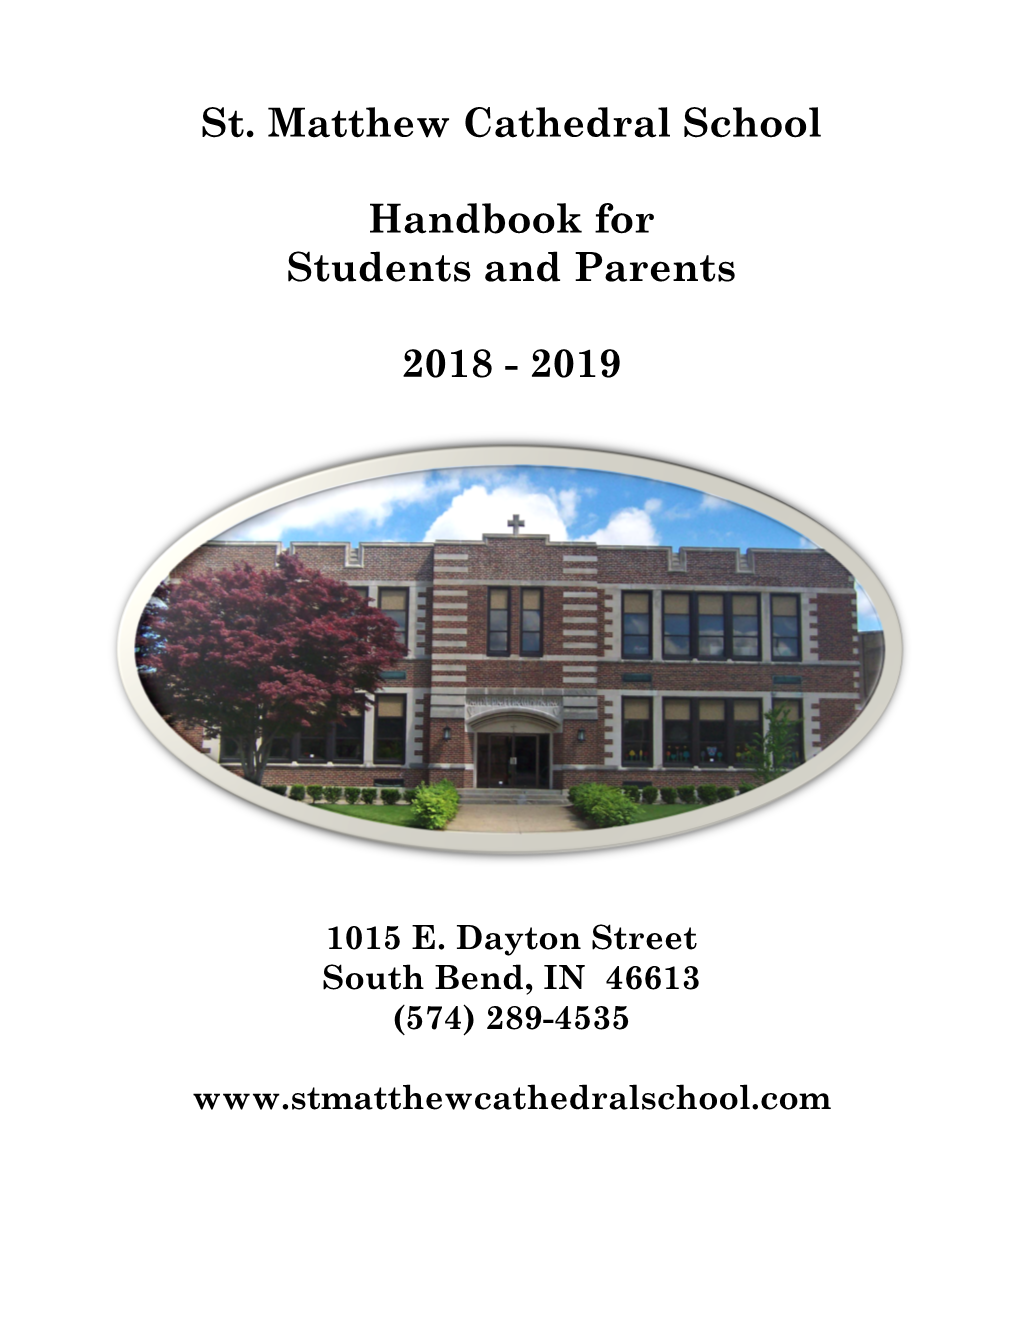 St. Matthew Cathedral School Handbook for Students and Parents